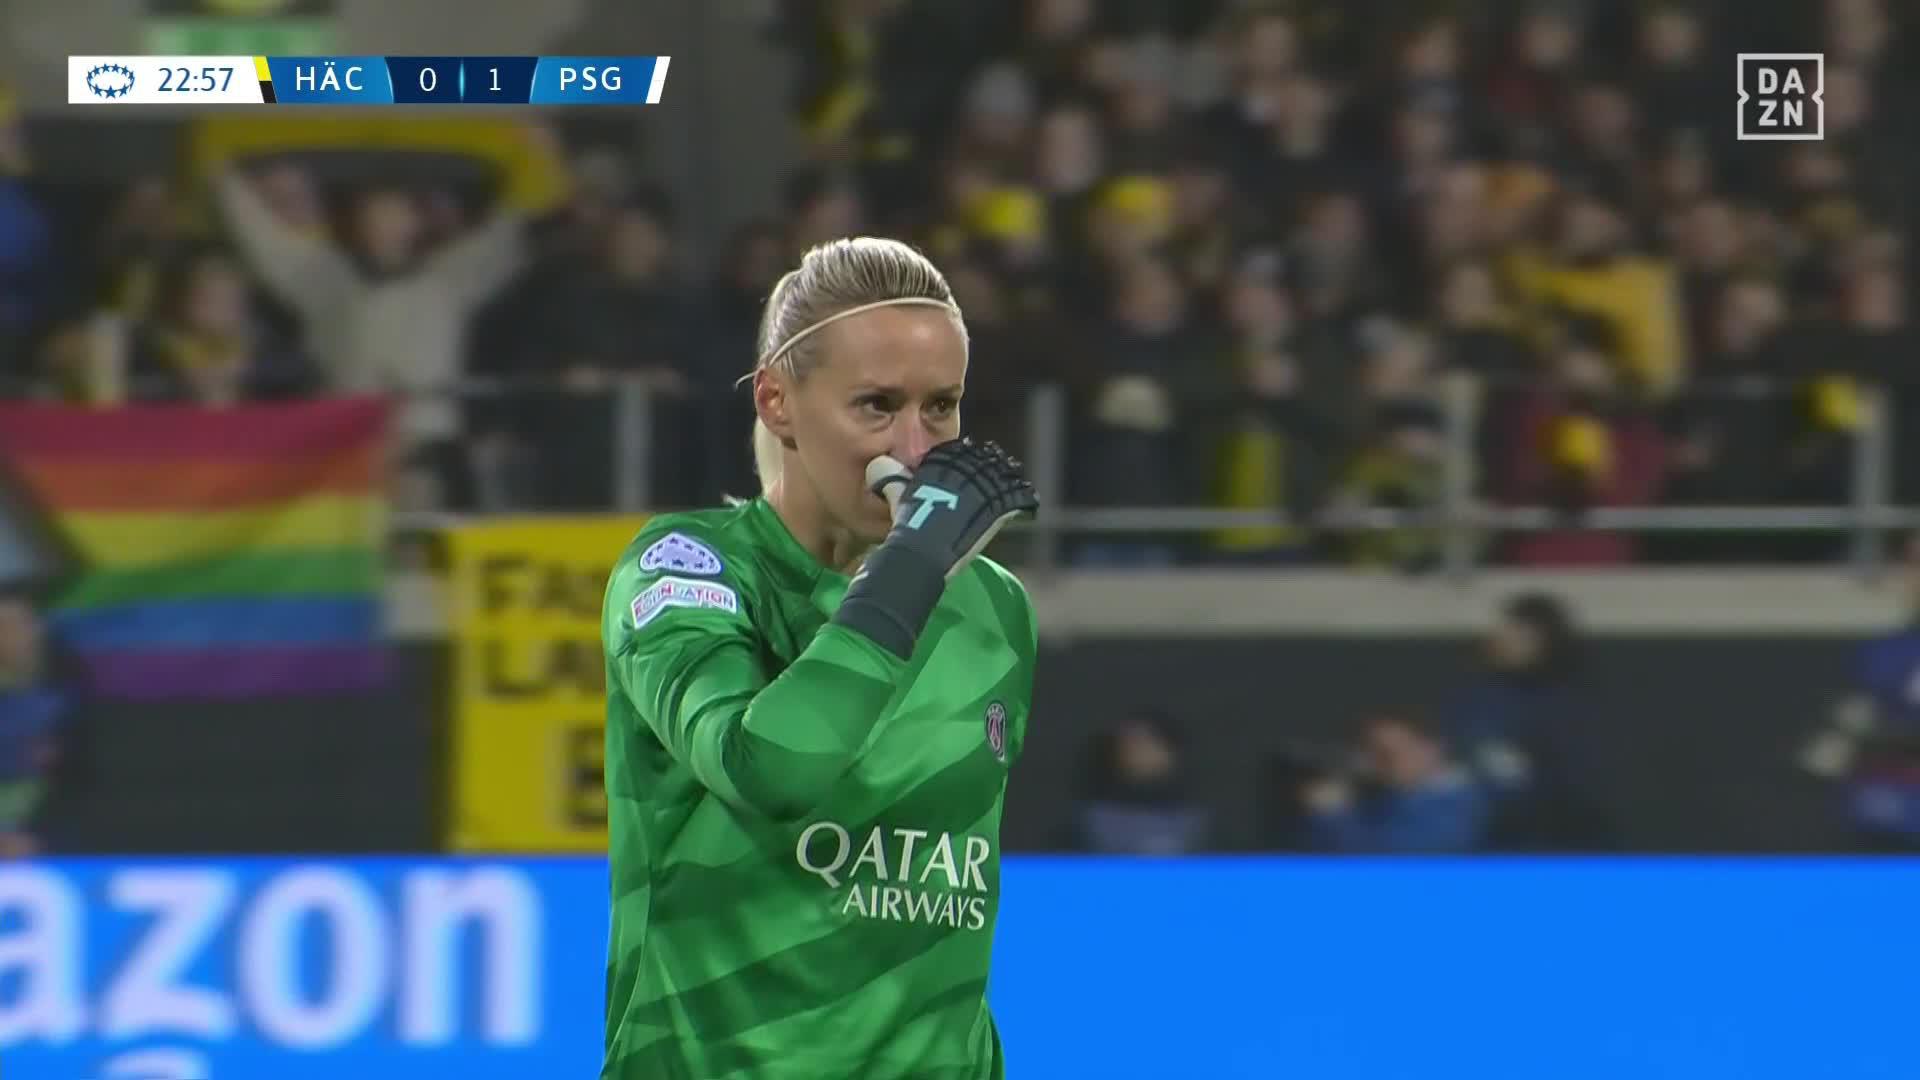 PSG TAKE THE LEAD IN SWEDEN! 😱Watch BK Häcken vs. PSG LIVE and FREE on  #UWCLonDAZN #NewDealforWomensFootball